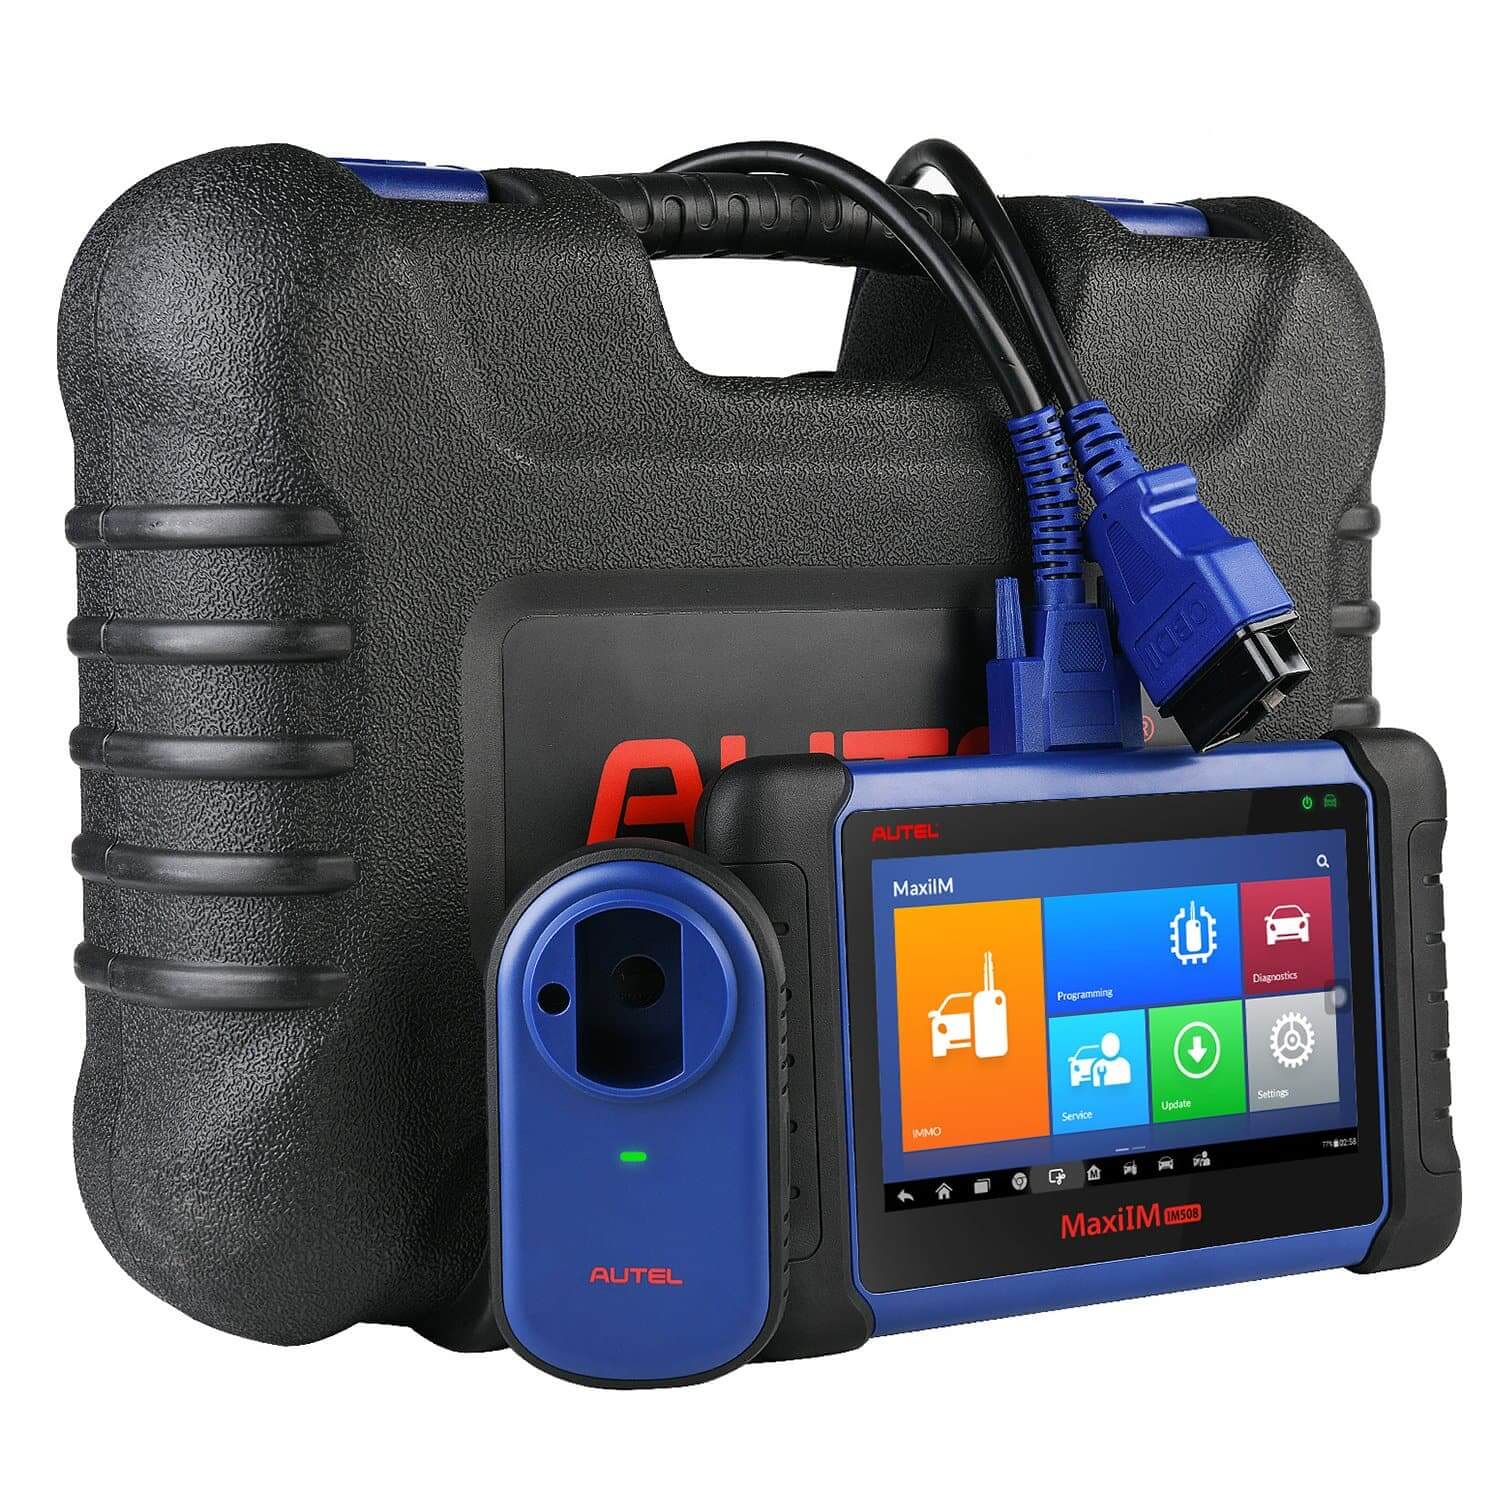  fast portable immobilizer device vehicle diagnostic tool with XP200